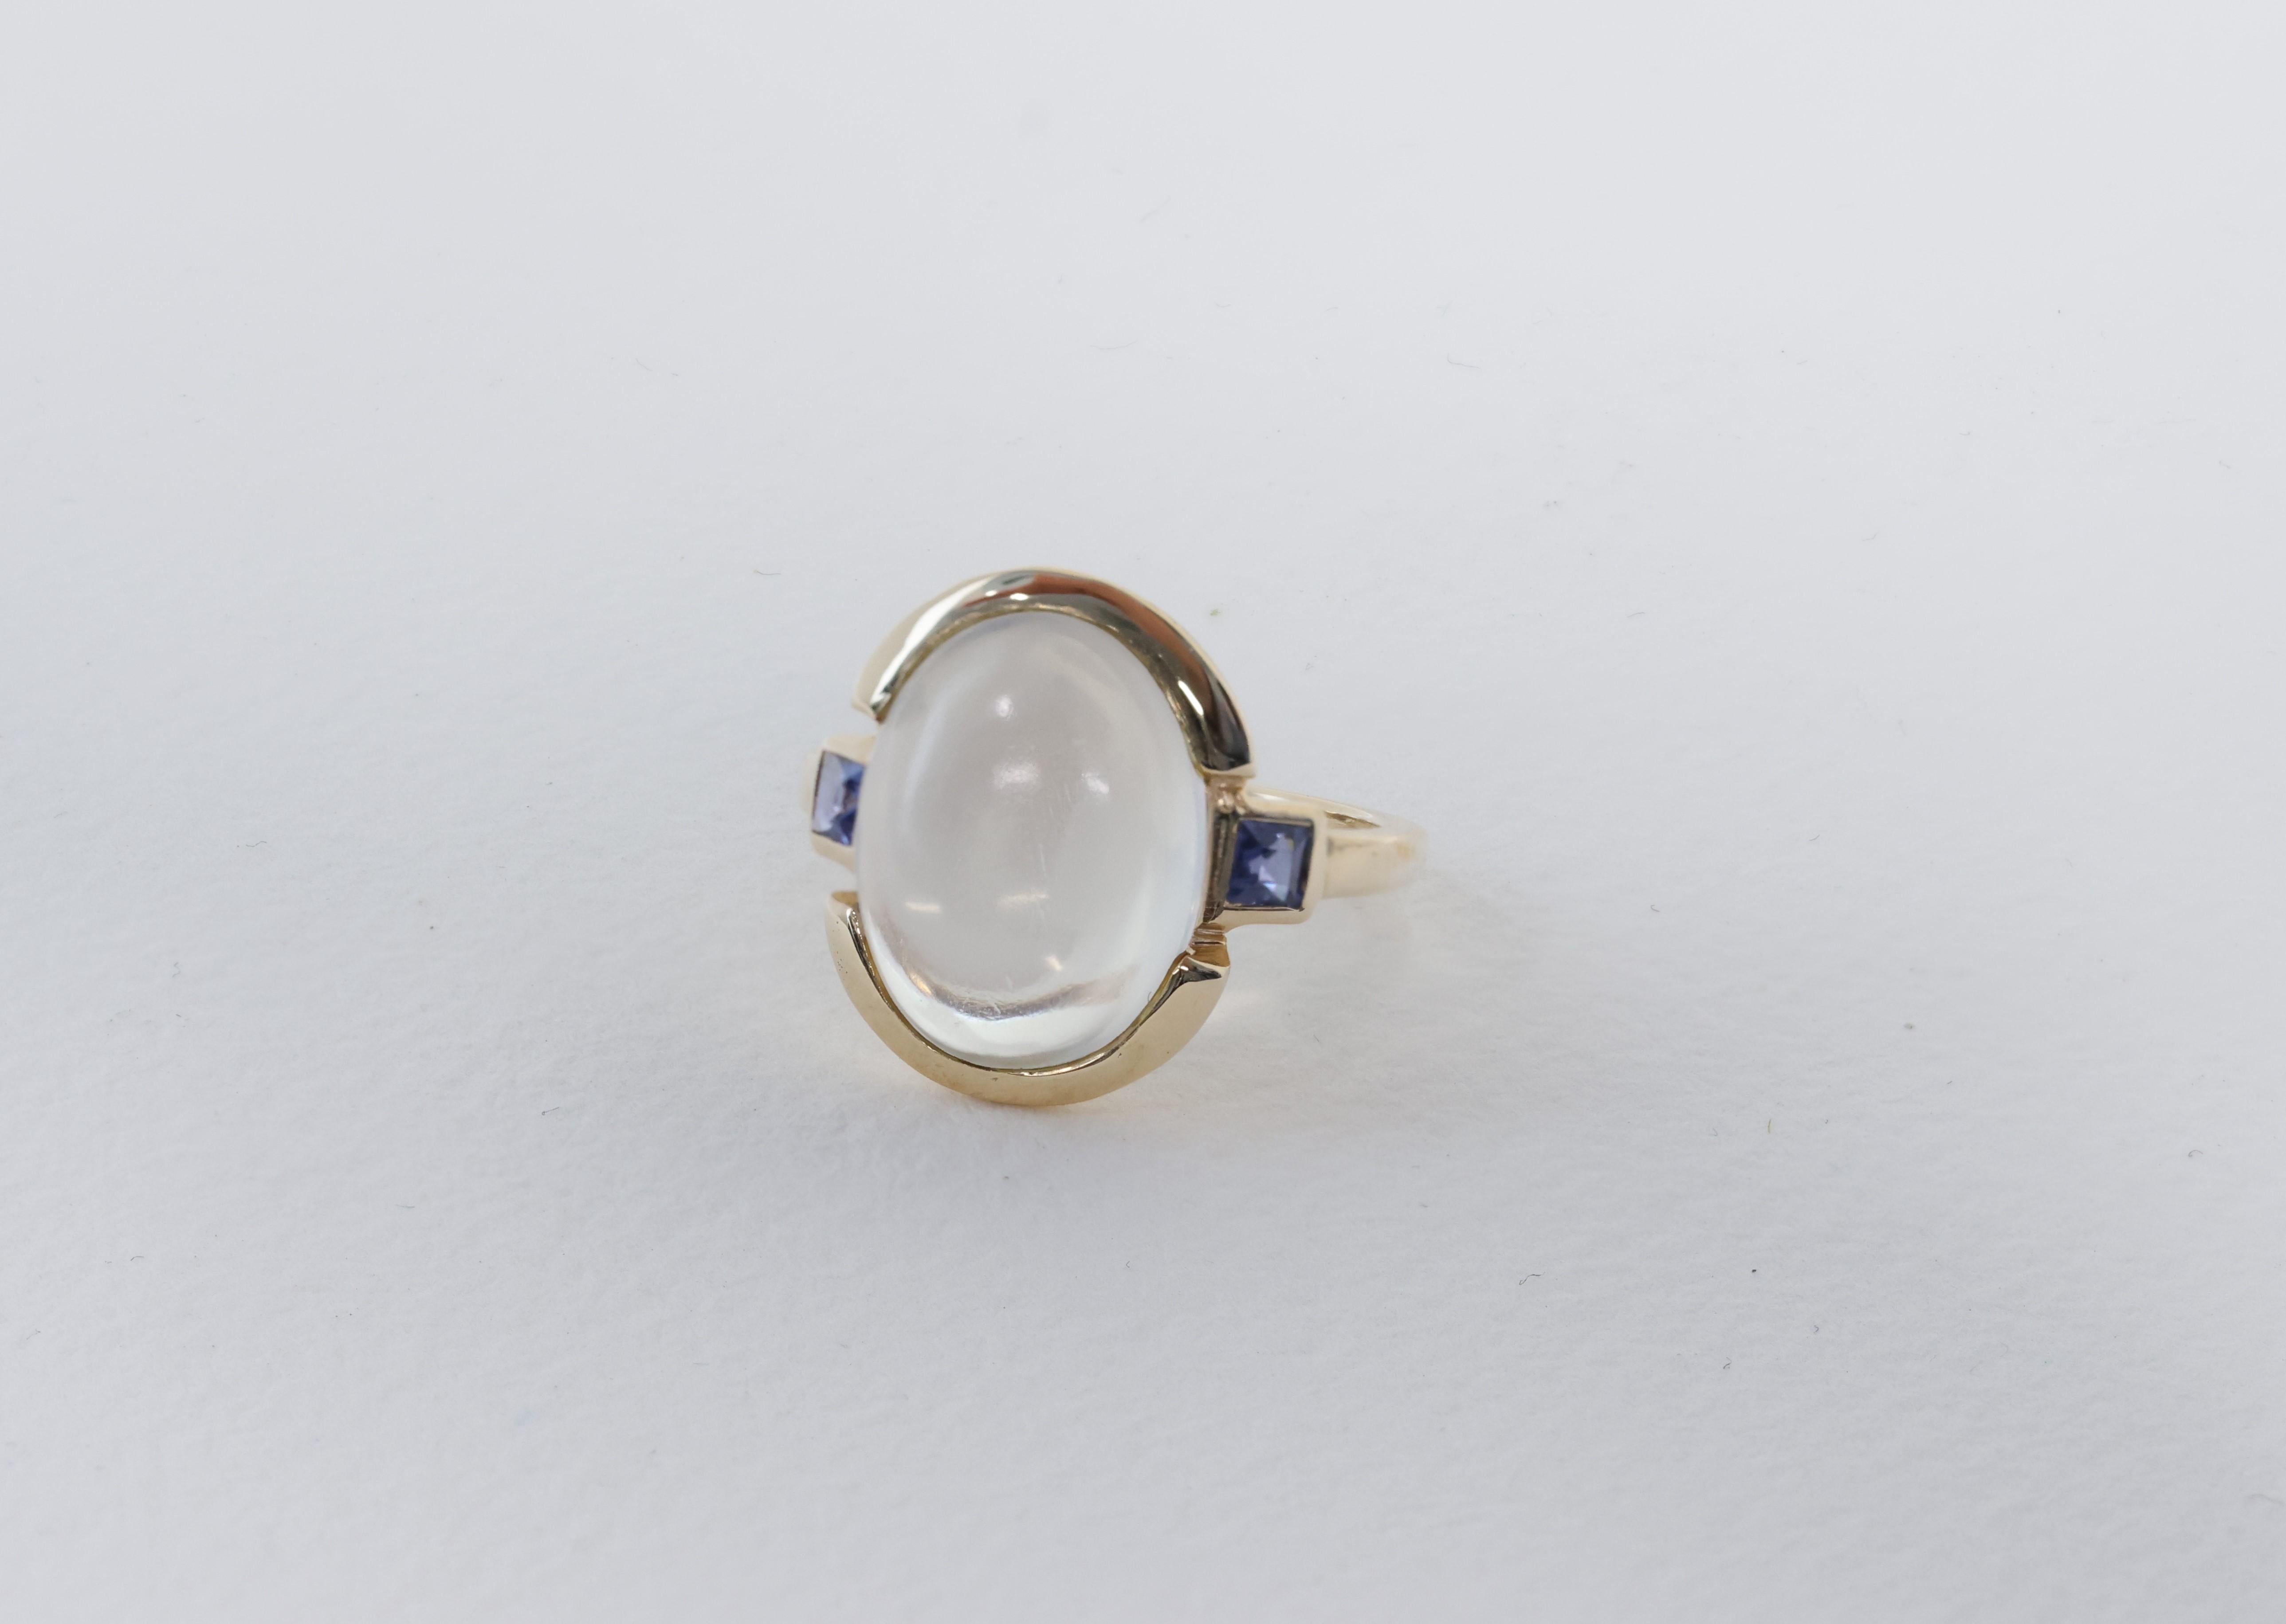 Circa 1950s, 14k, Tiffany & Co. This fabulous fifties ring by Tiffany & Co. is set with a fine 4.50 carat moonstone framed by two vibrant sapphires (.35 carat total). The moonstone’s luminescent appearance and delicate chatoyancy give it